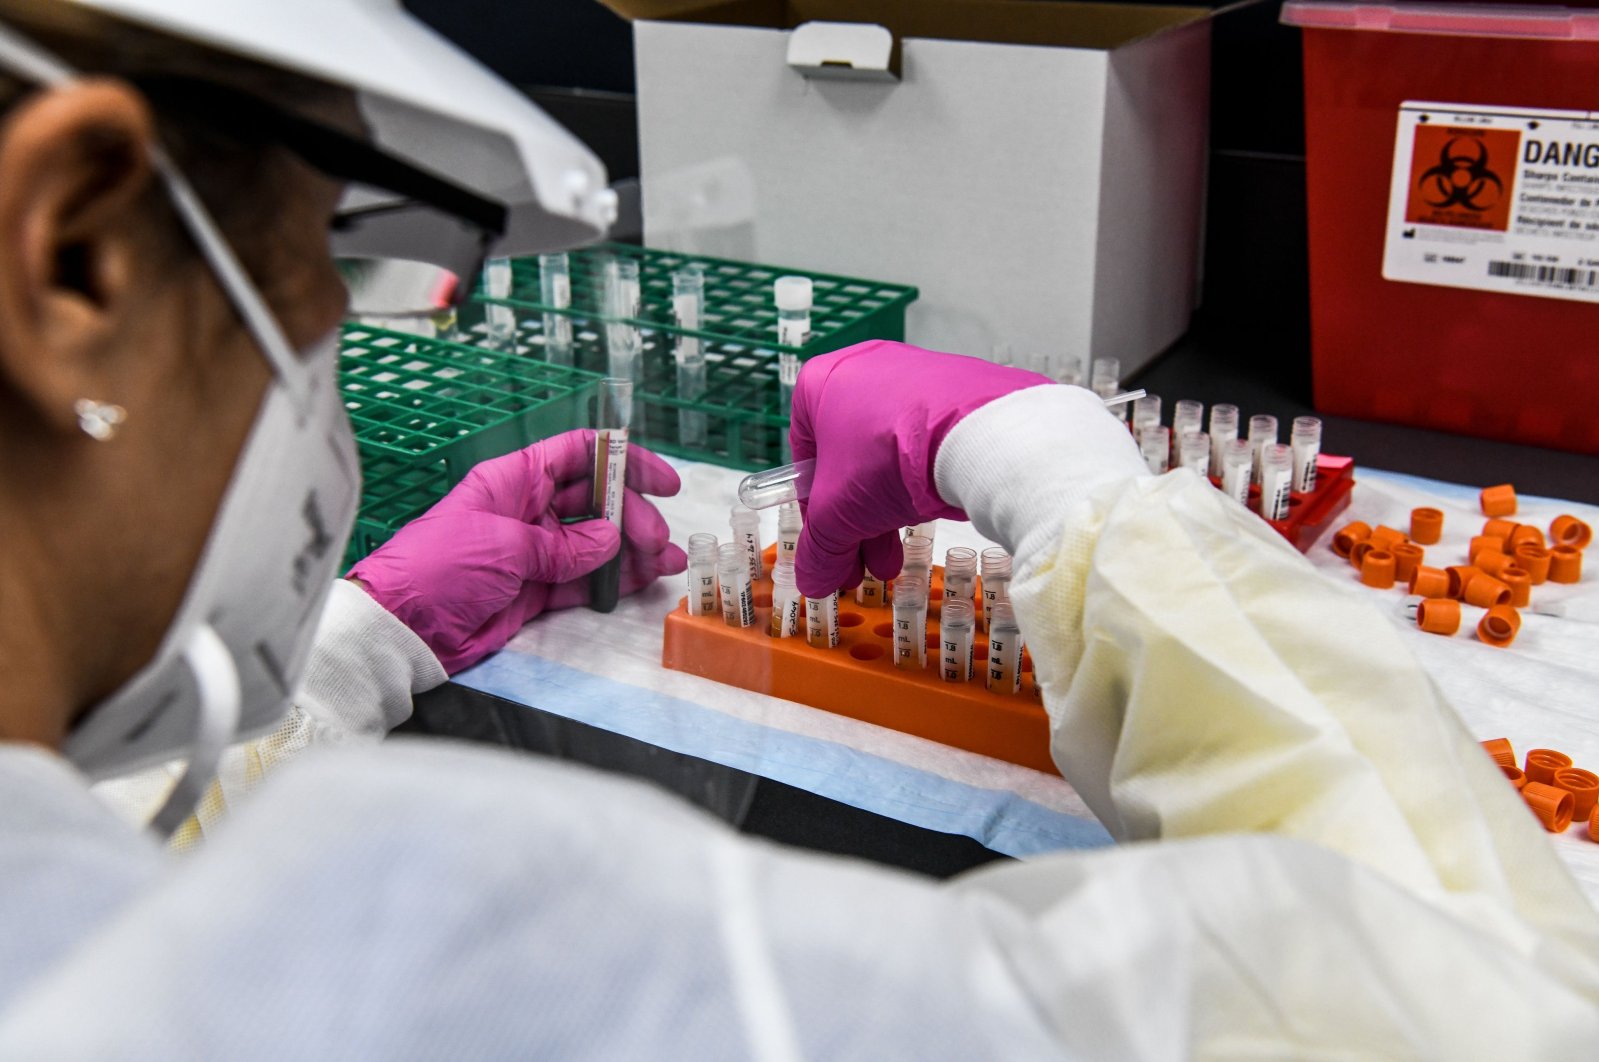 A lab technician sorts blood samples inside a lab for a COVID-19 vaccine study at the Research Centers of America (RCA) in Hollywood, Florida, U.S., Aug. 13, 2020. (AFP Photo)